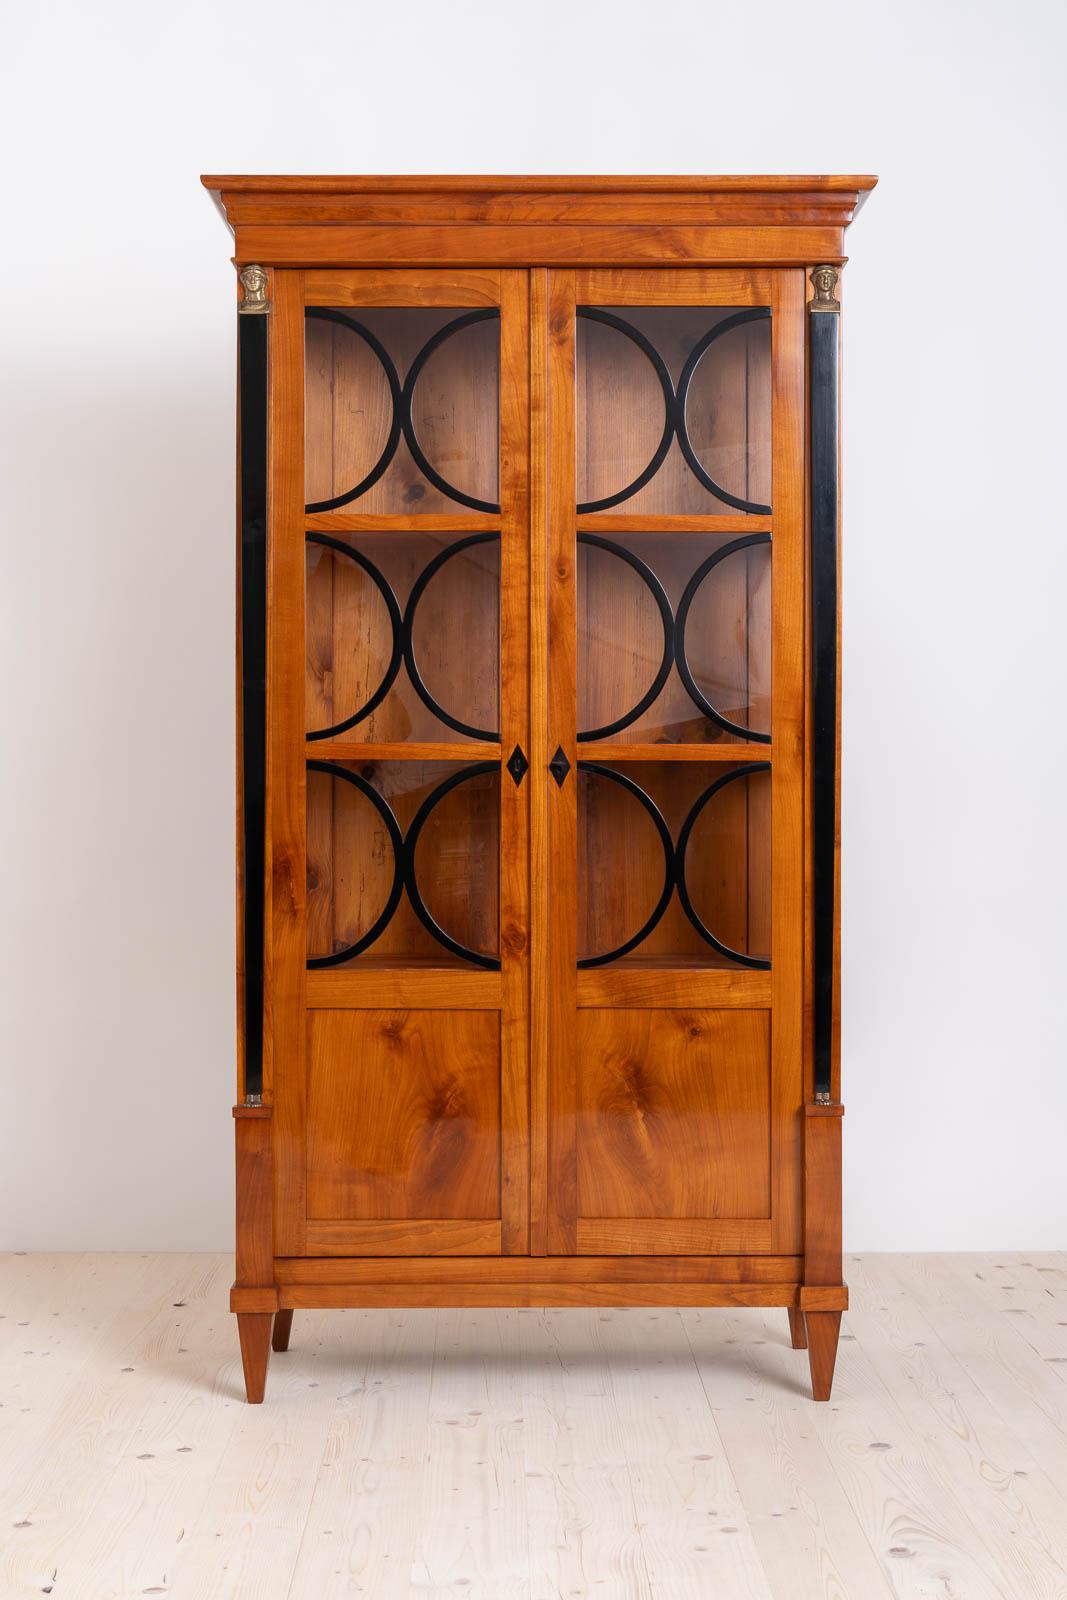 This beautiful vitrine comes from Germany and was made in 19th century, the Biedermeier period, showcasing a craftsmanship that stands the test of time.  The construction is made of solid cherrywood. Behind the doors lockable with a key you will